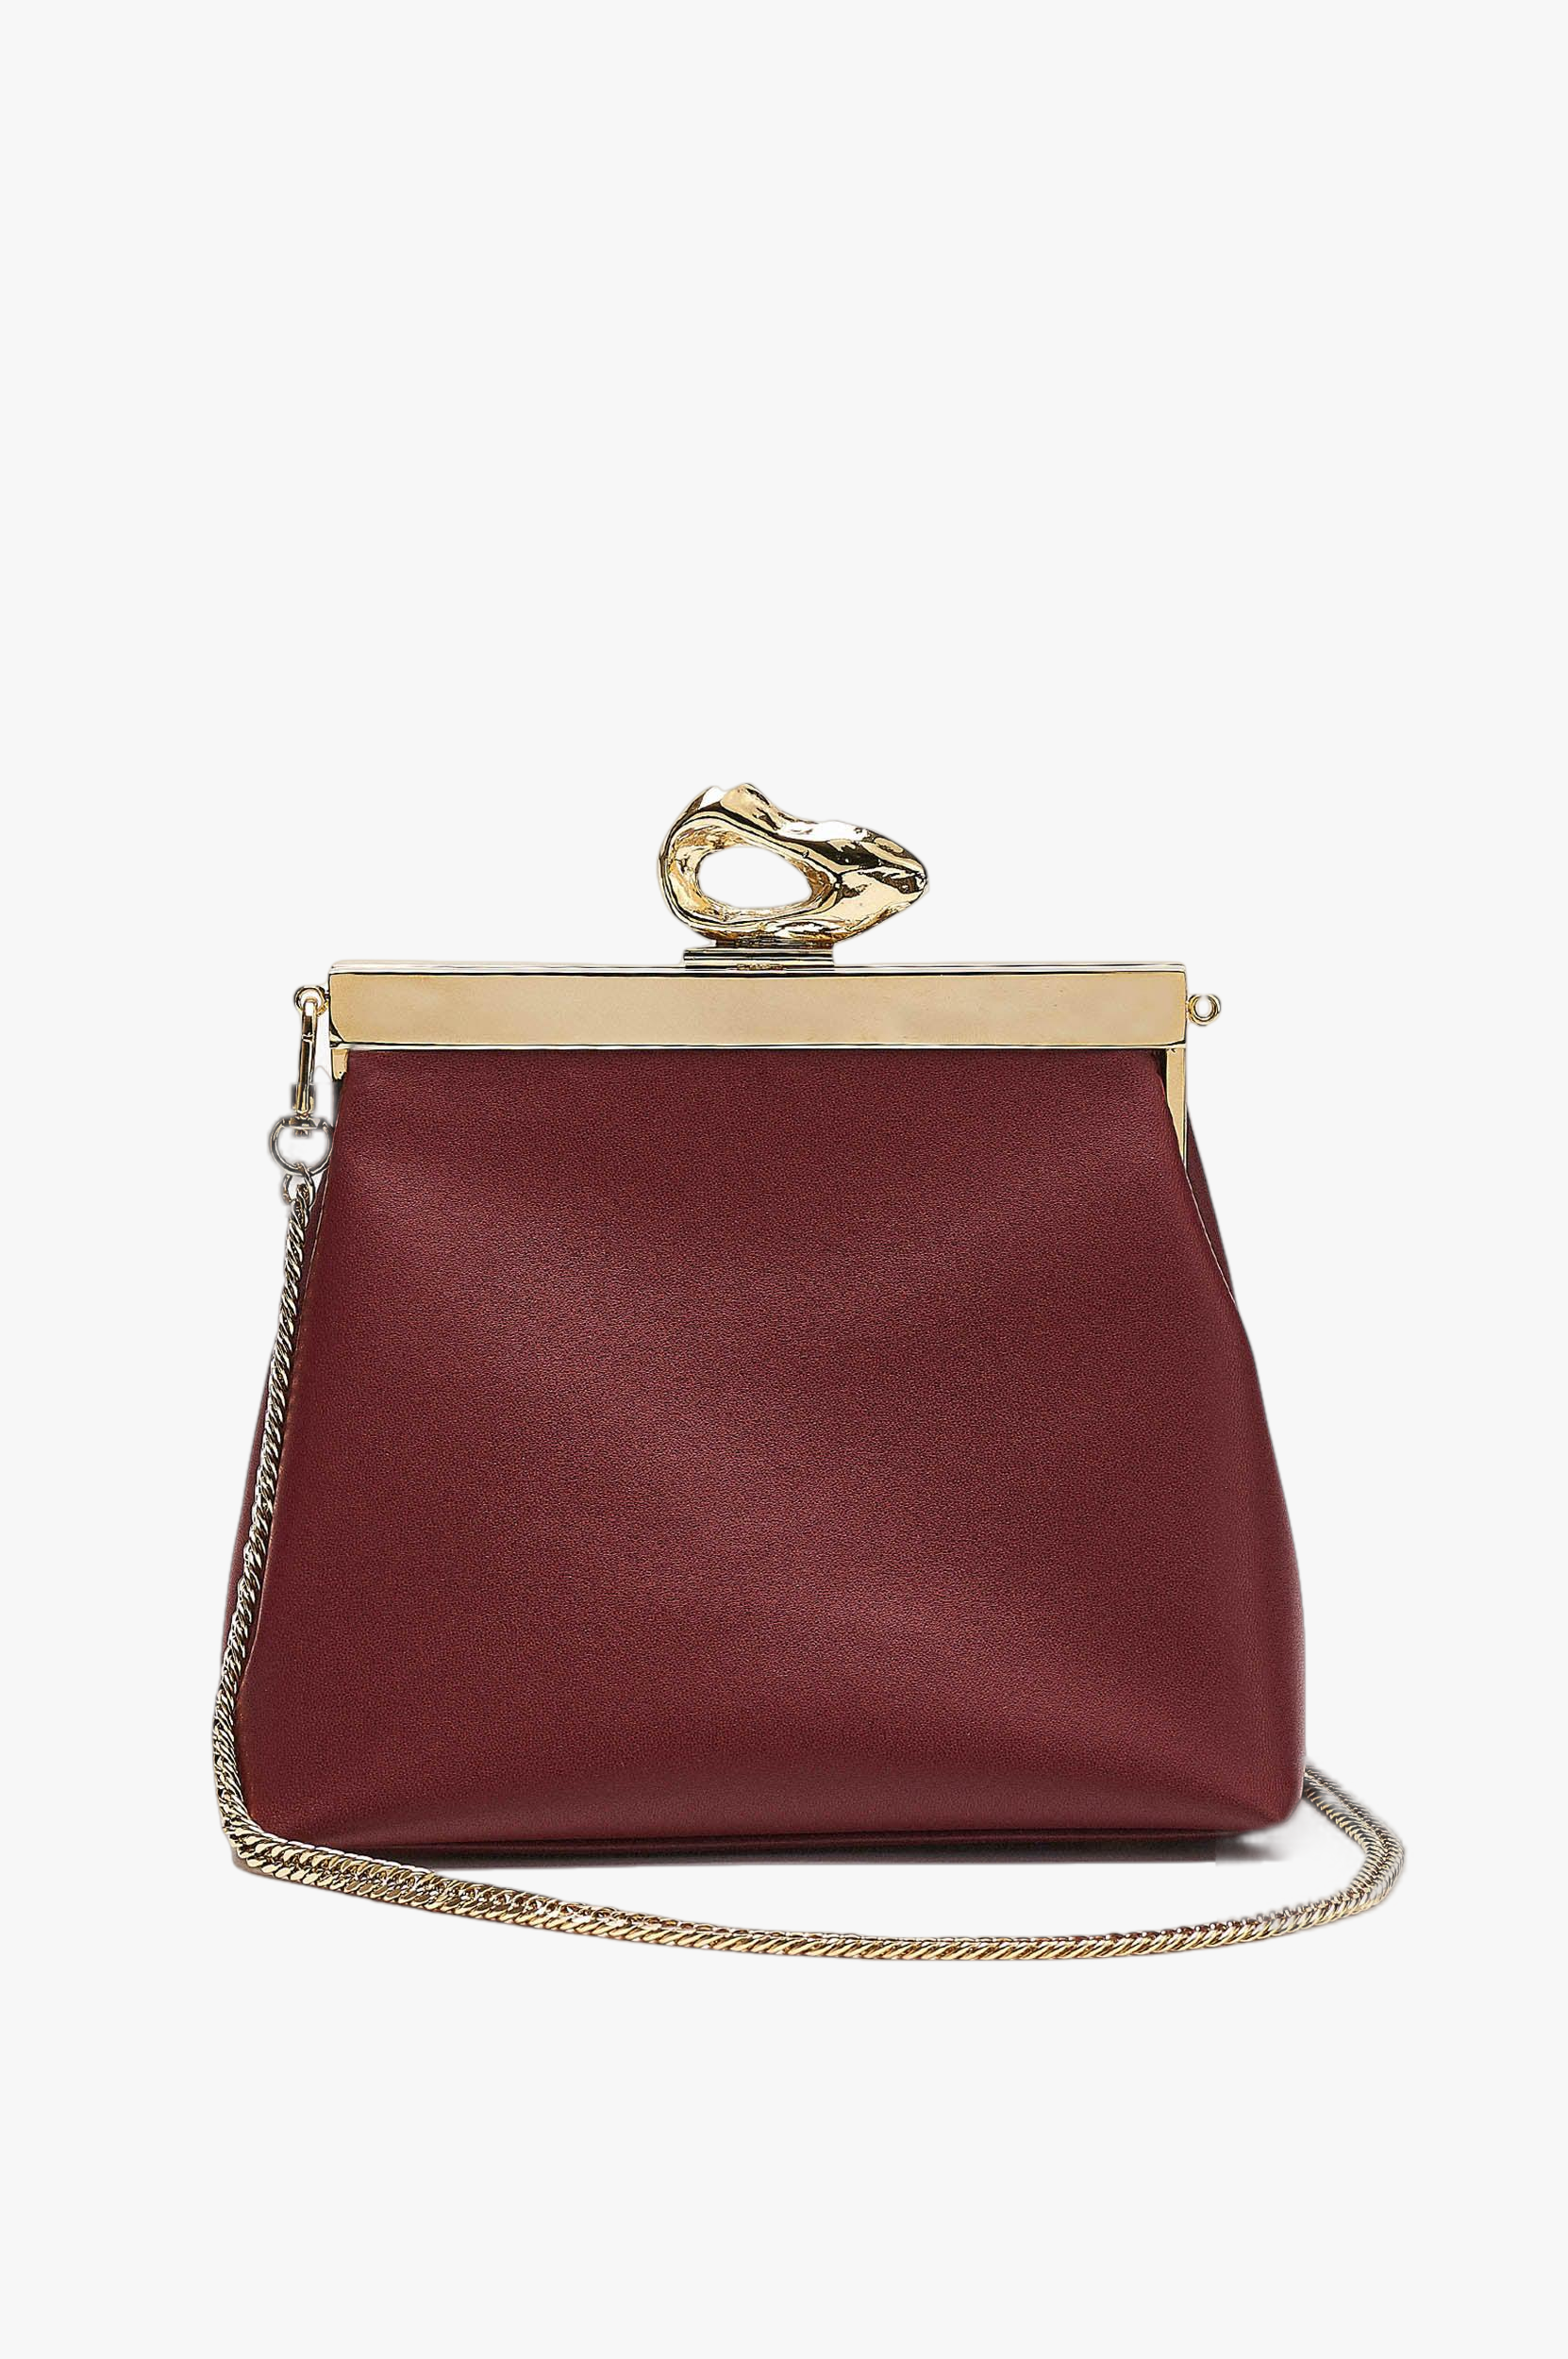 NatCole Calfskin Leather Handbag with a Matching Wallet